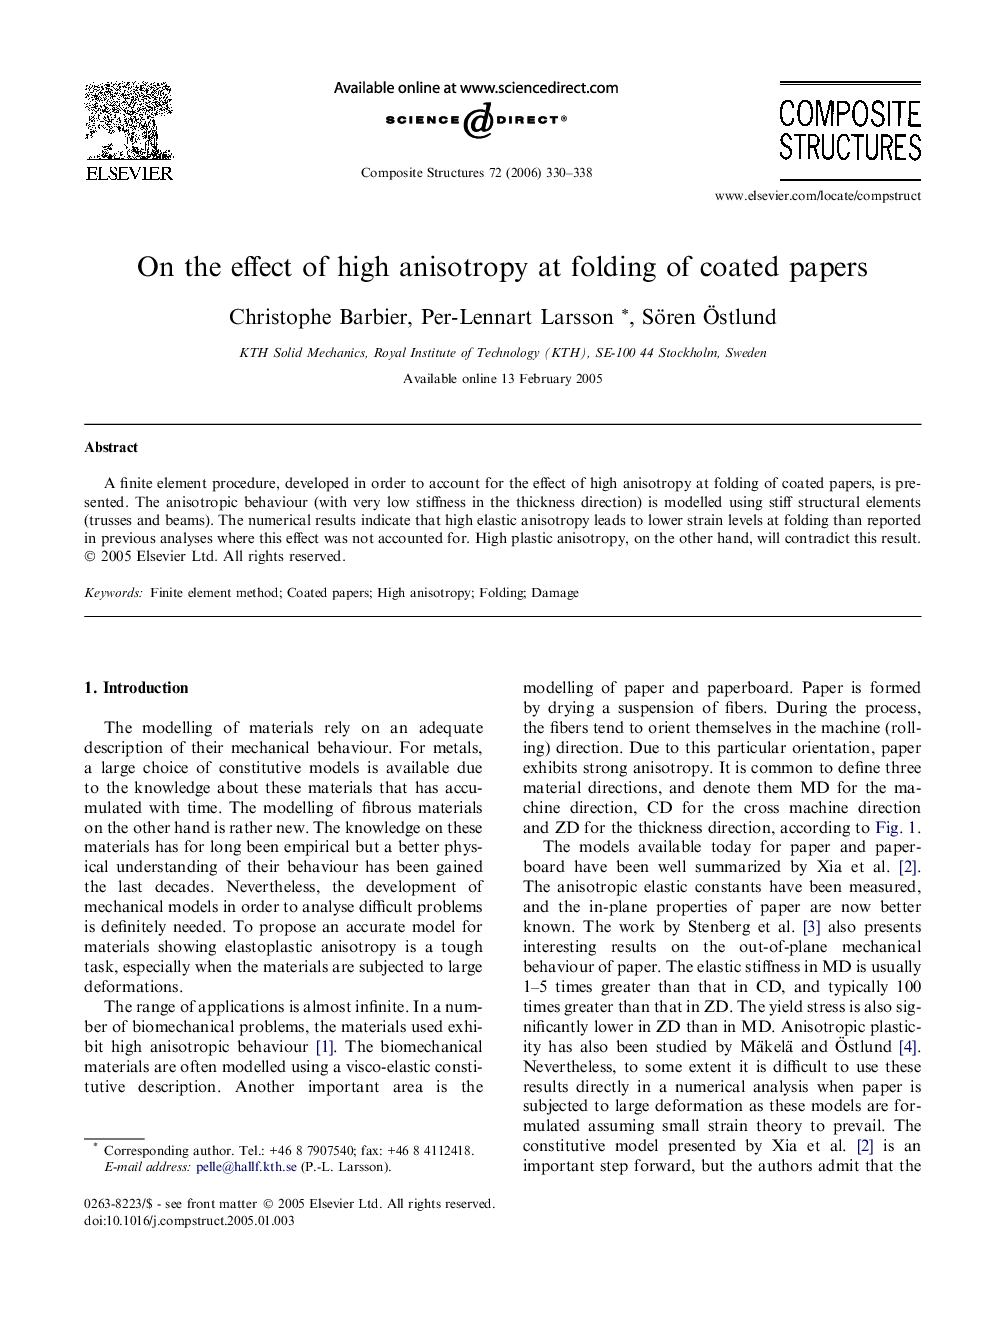 On the effect of high anisotropy at folding of coated papers